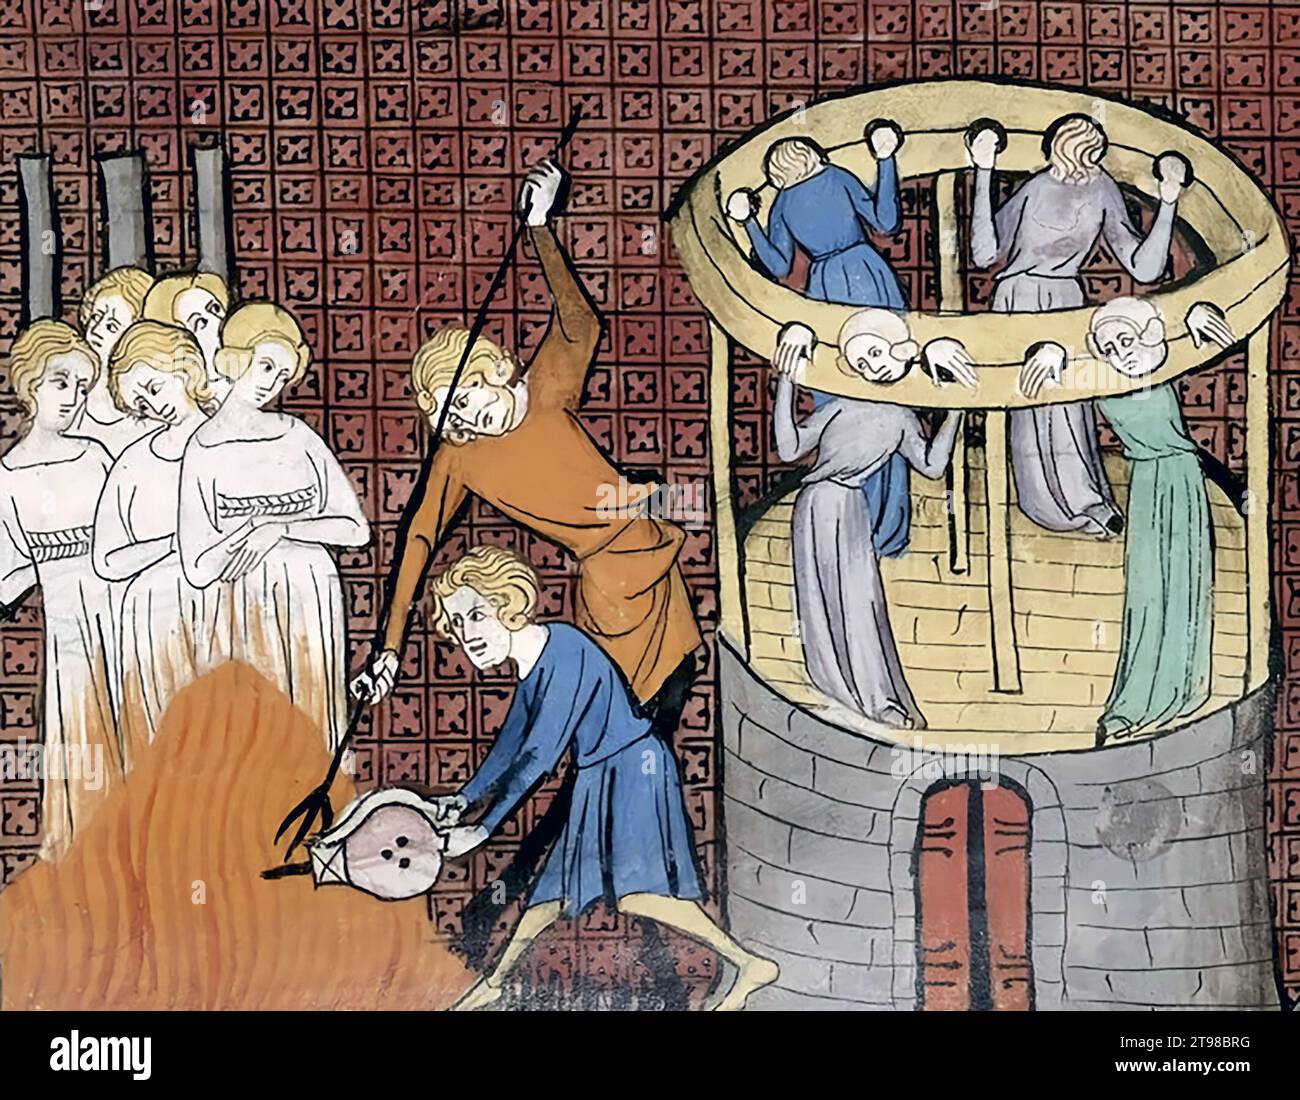 Witch Burning. Burning with others held in stocks, 14th century illustration Stock Photo